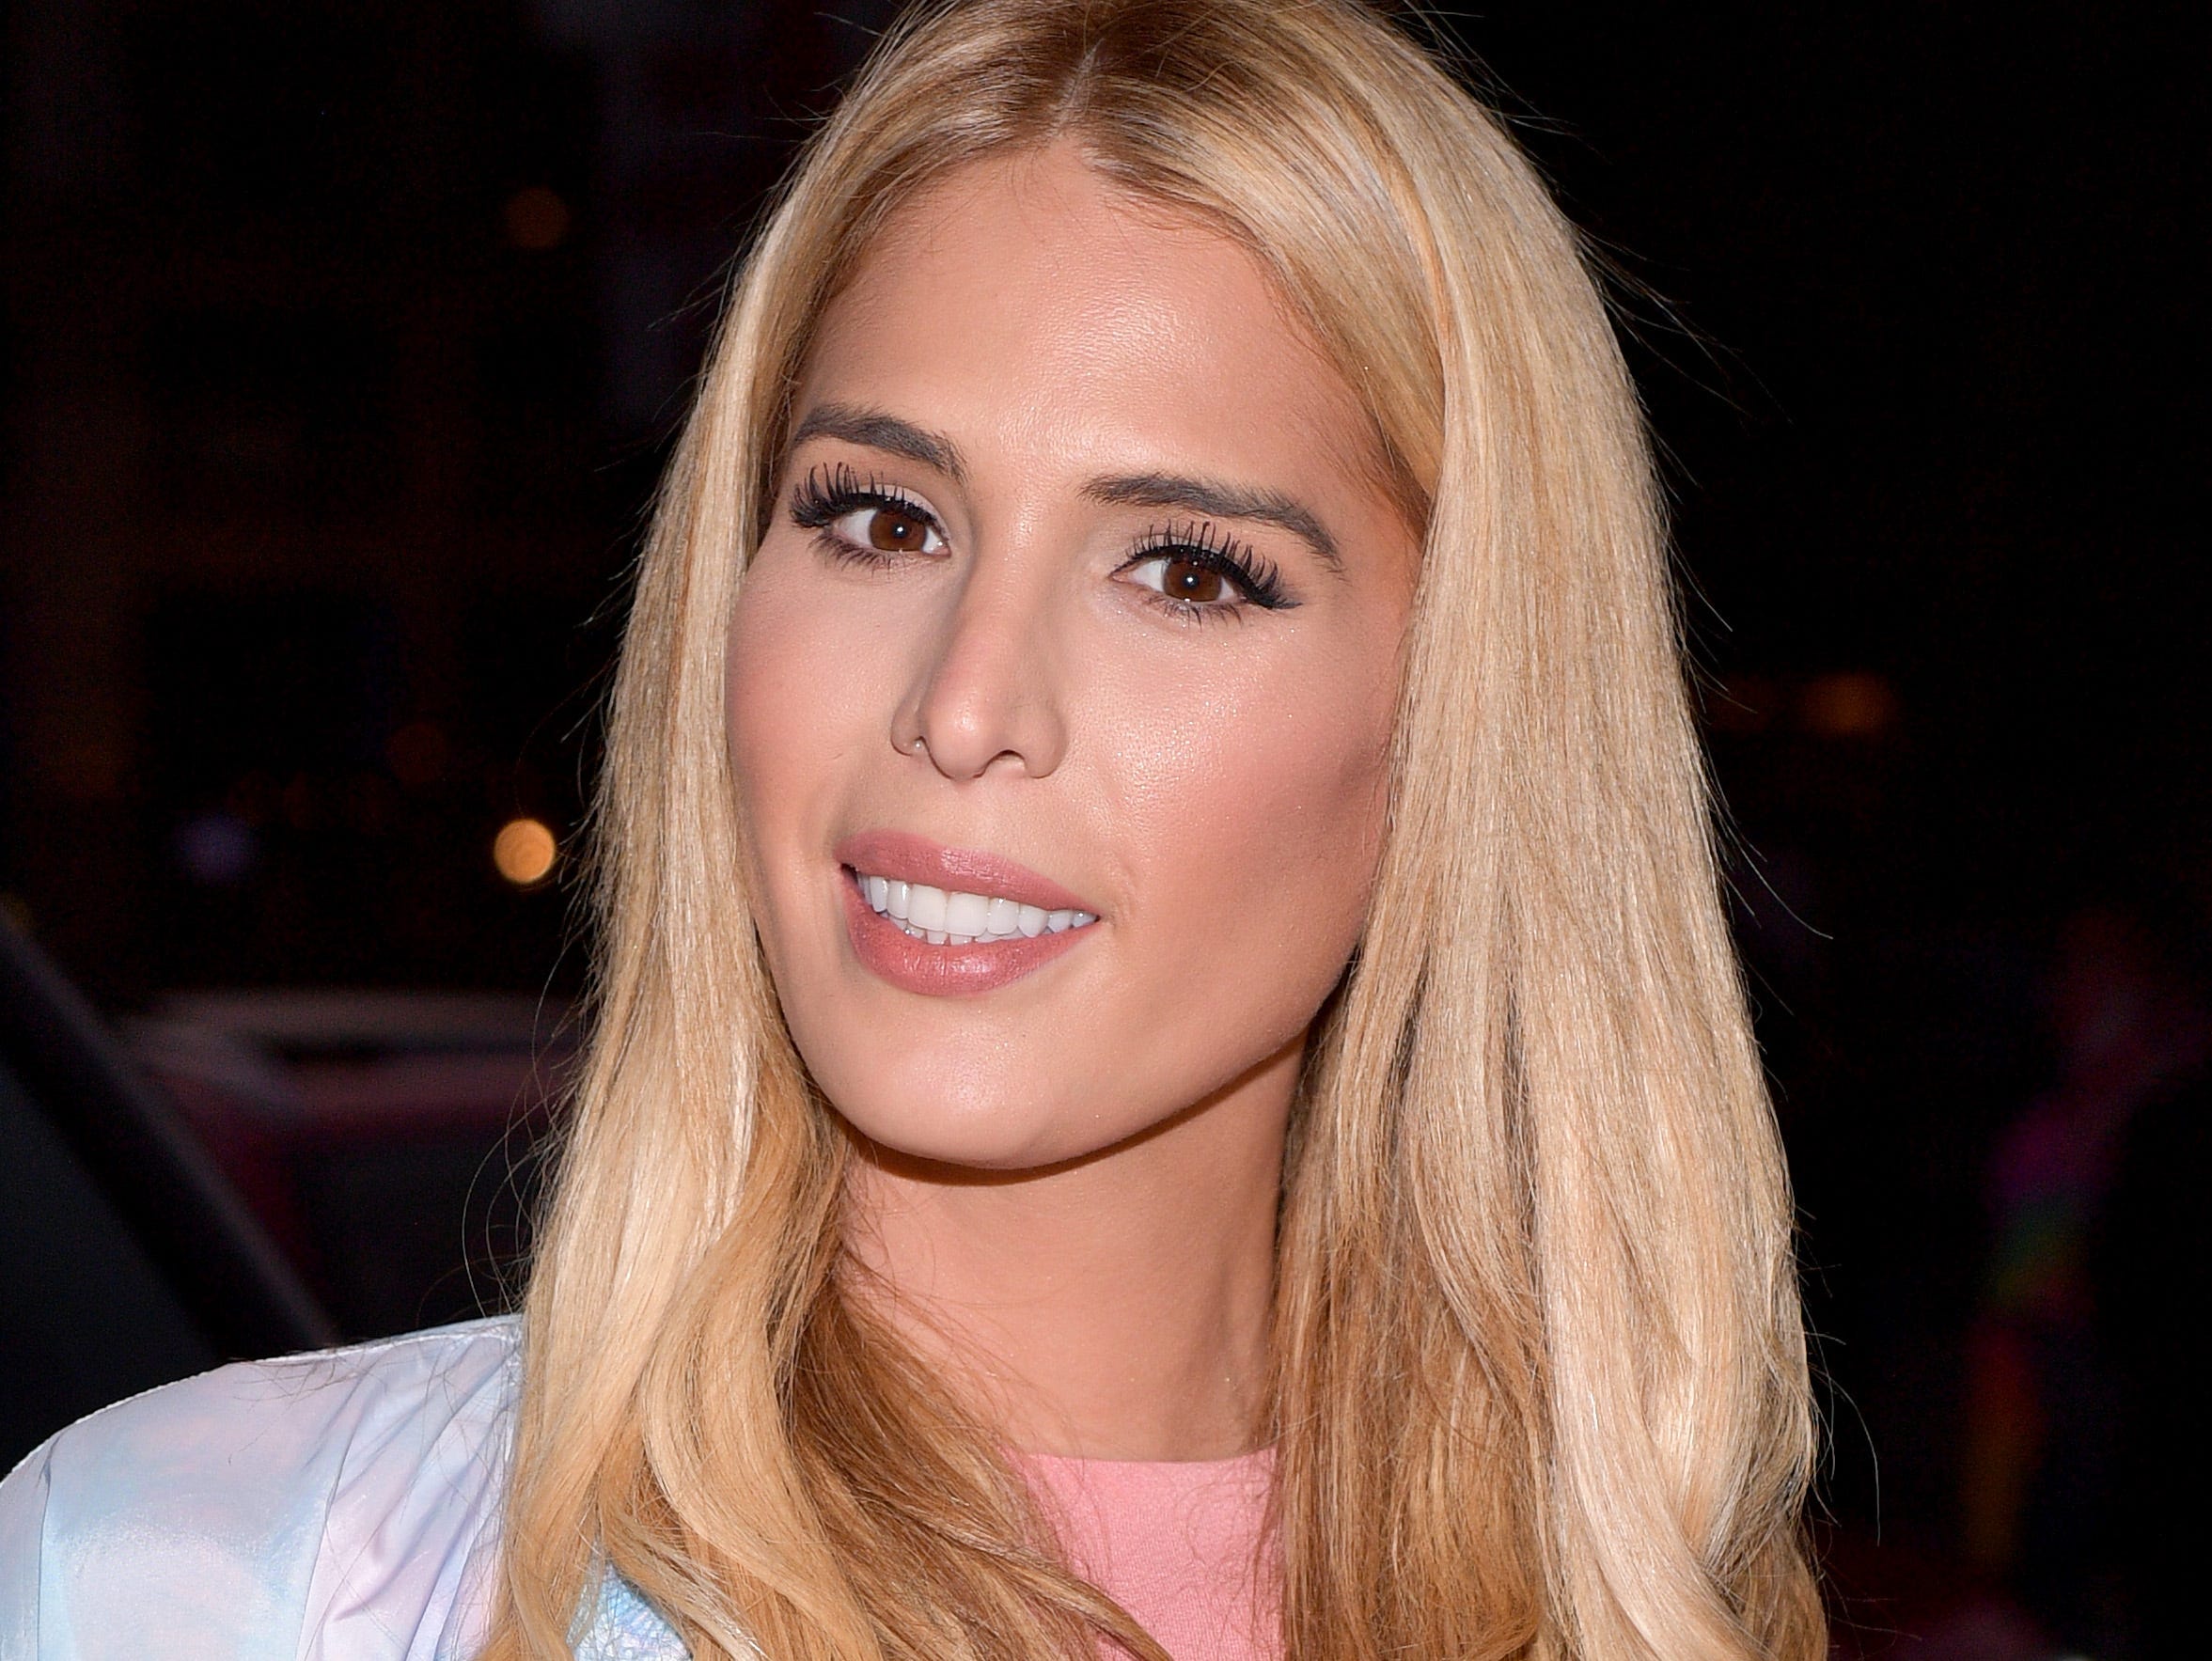 Actress and activist Carmen Carrera wants trans roles in Hollywood to